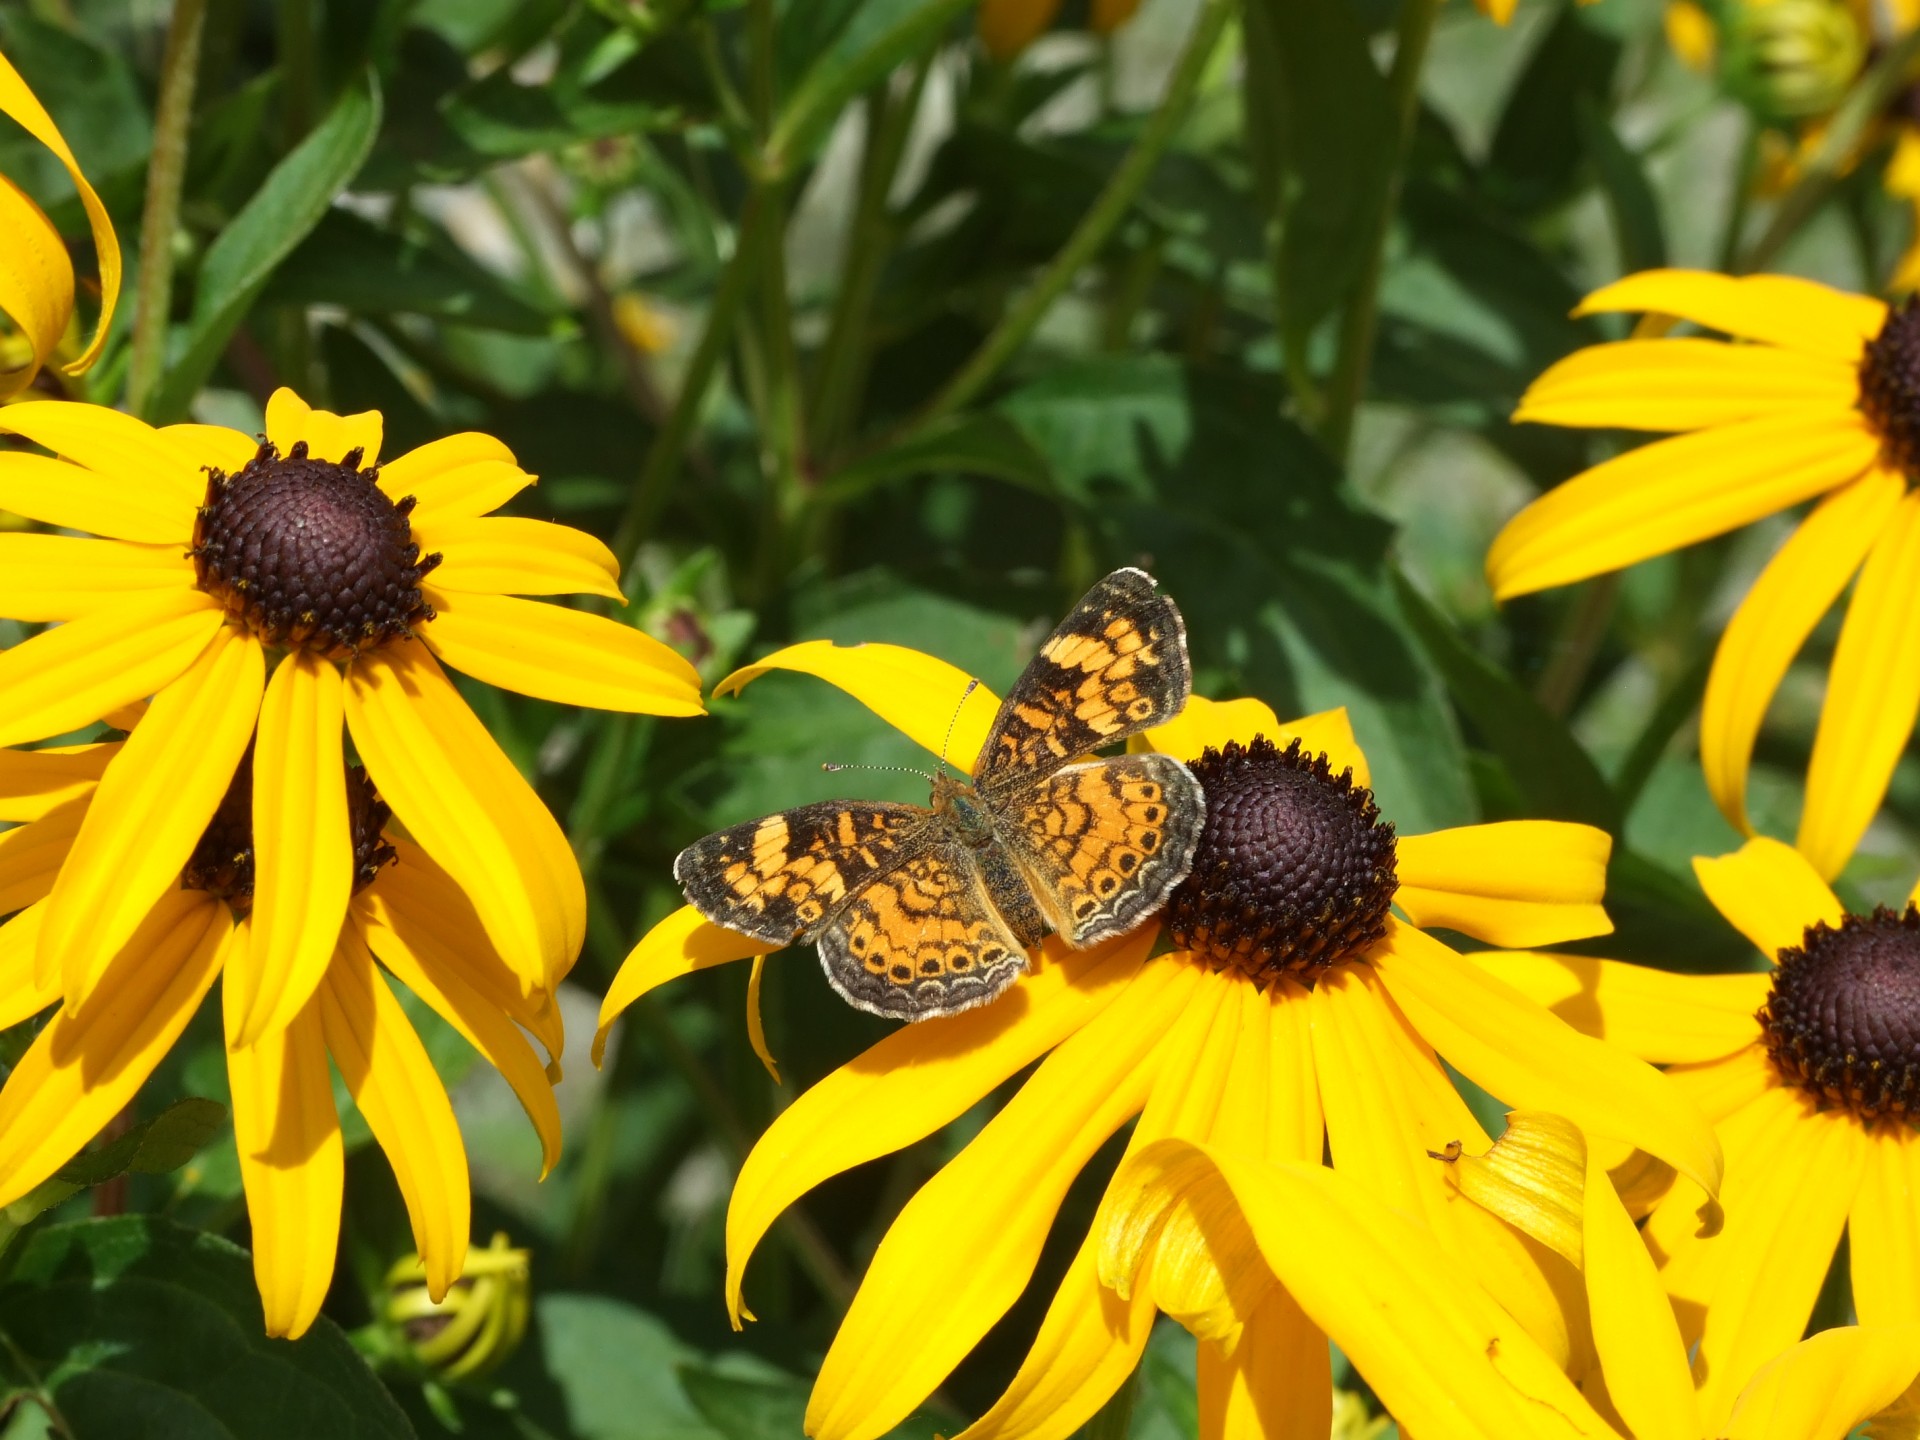 Pretty Black and Orange Butterfly spending a Summer Day with the Black Eyed Susan Flowers